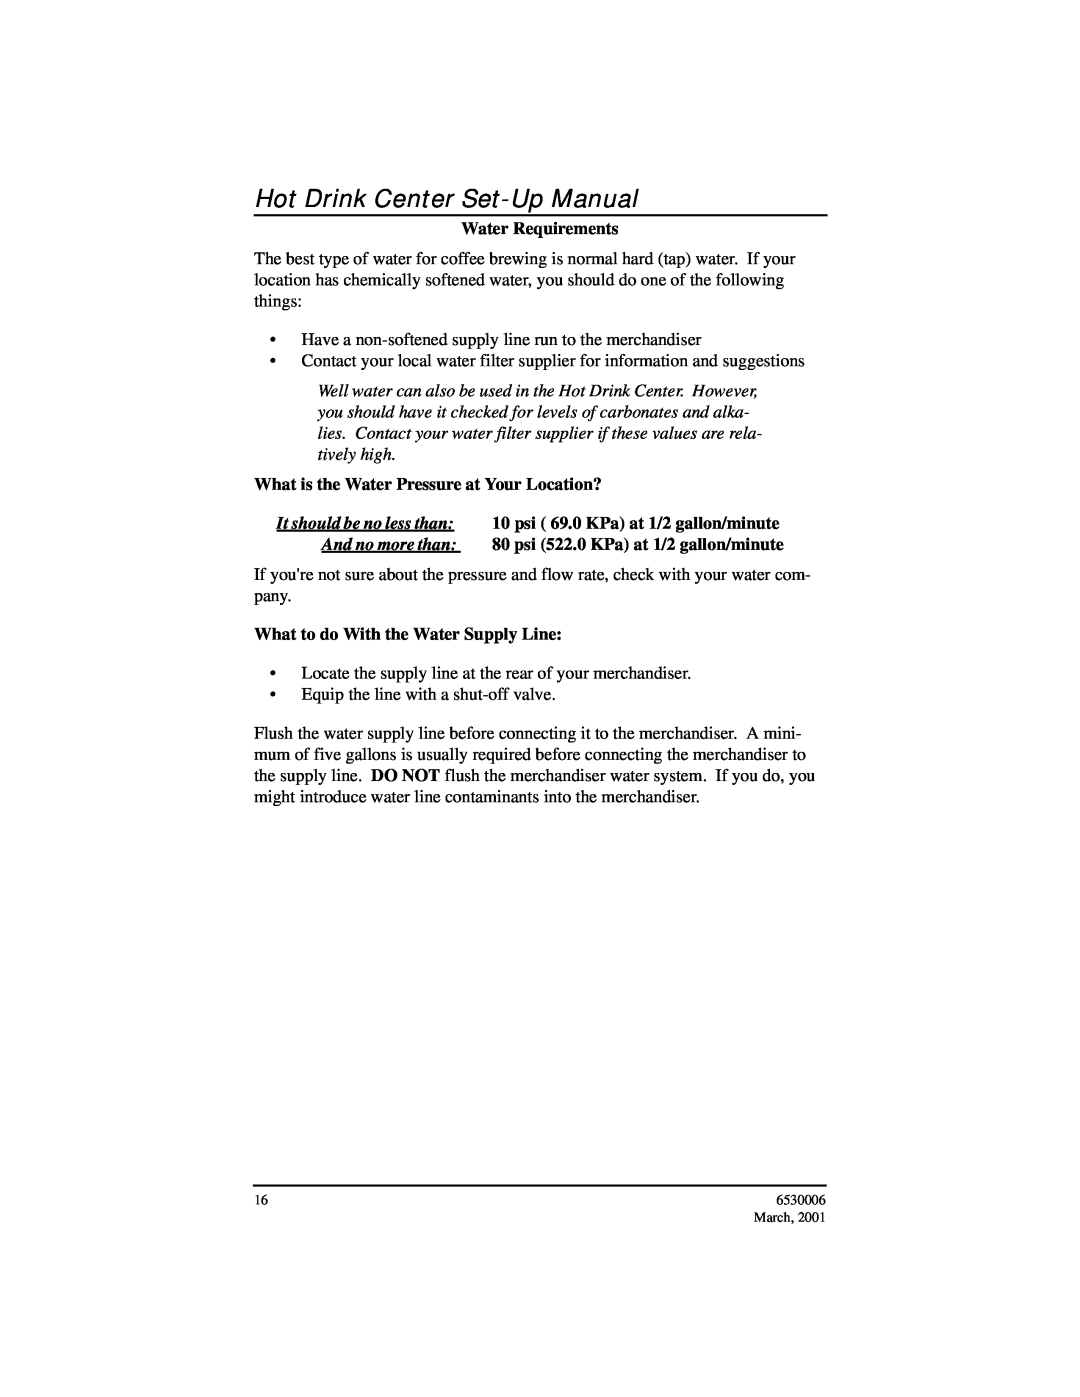 Crane Merchandising Systems Hot Drink Center Set-Up Manual, Water Requirements, What to do With the Water Supply Line 